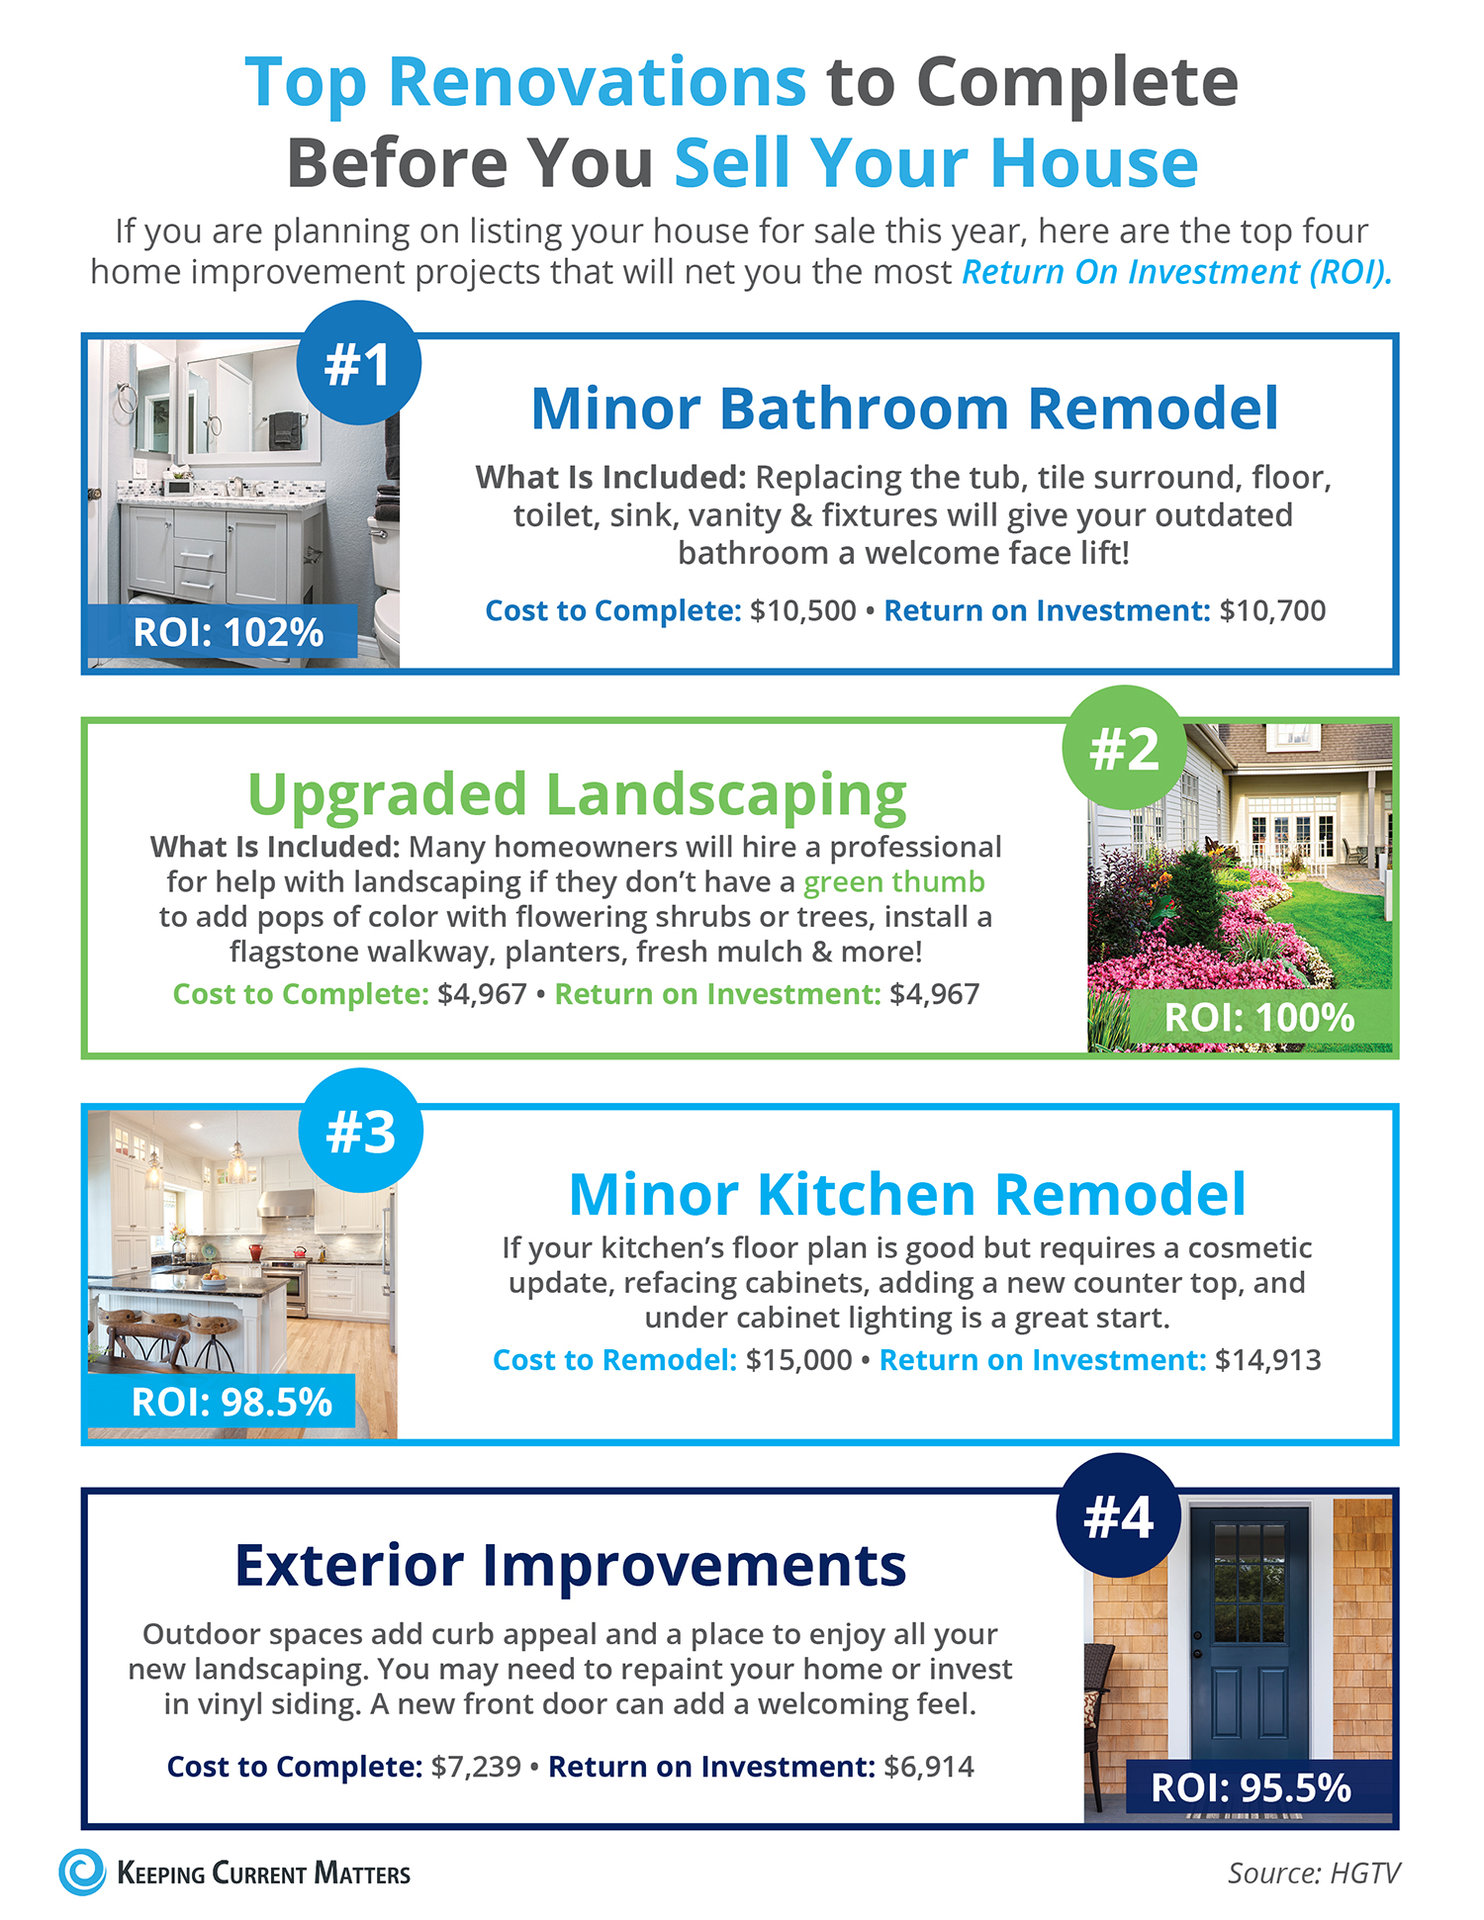 Top Renovations to Complete Before You Sell Your House [INFOGRAPHIC] | Keeping Current Matters